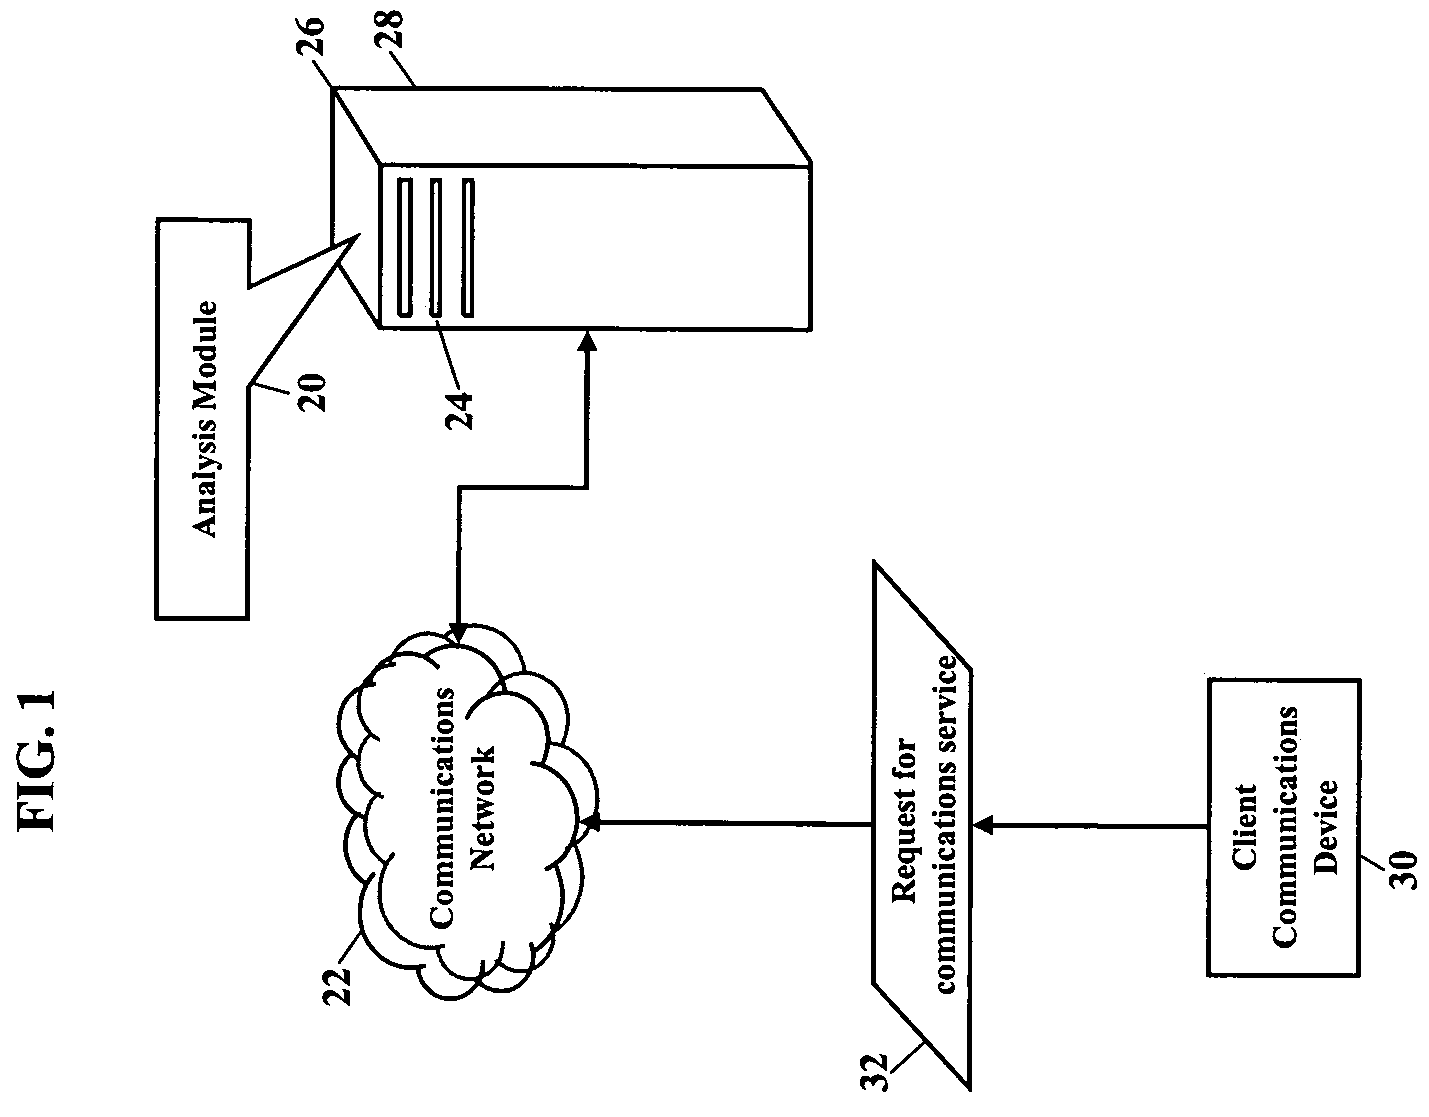 Methods, systems, and products for providing communications services amongst multiple providers